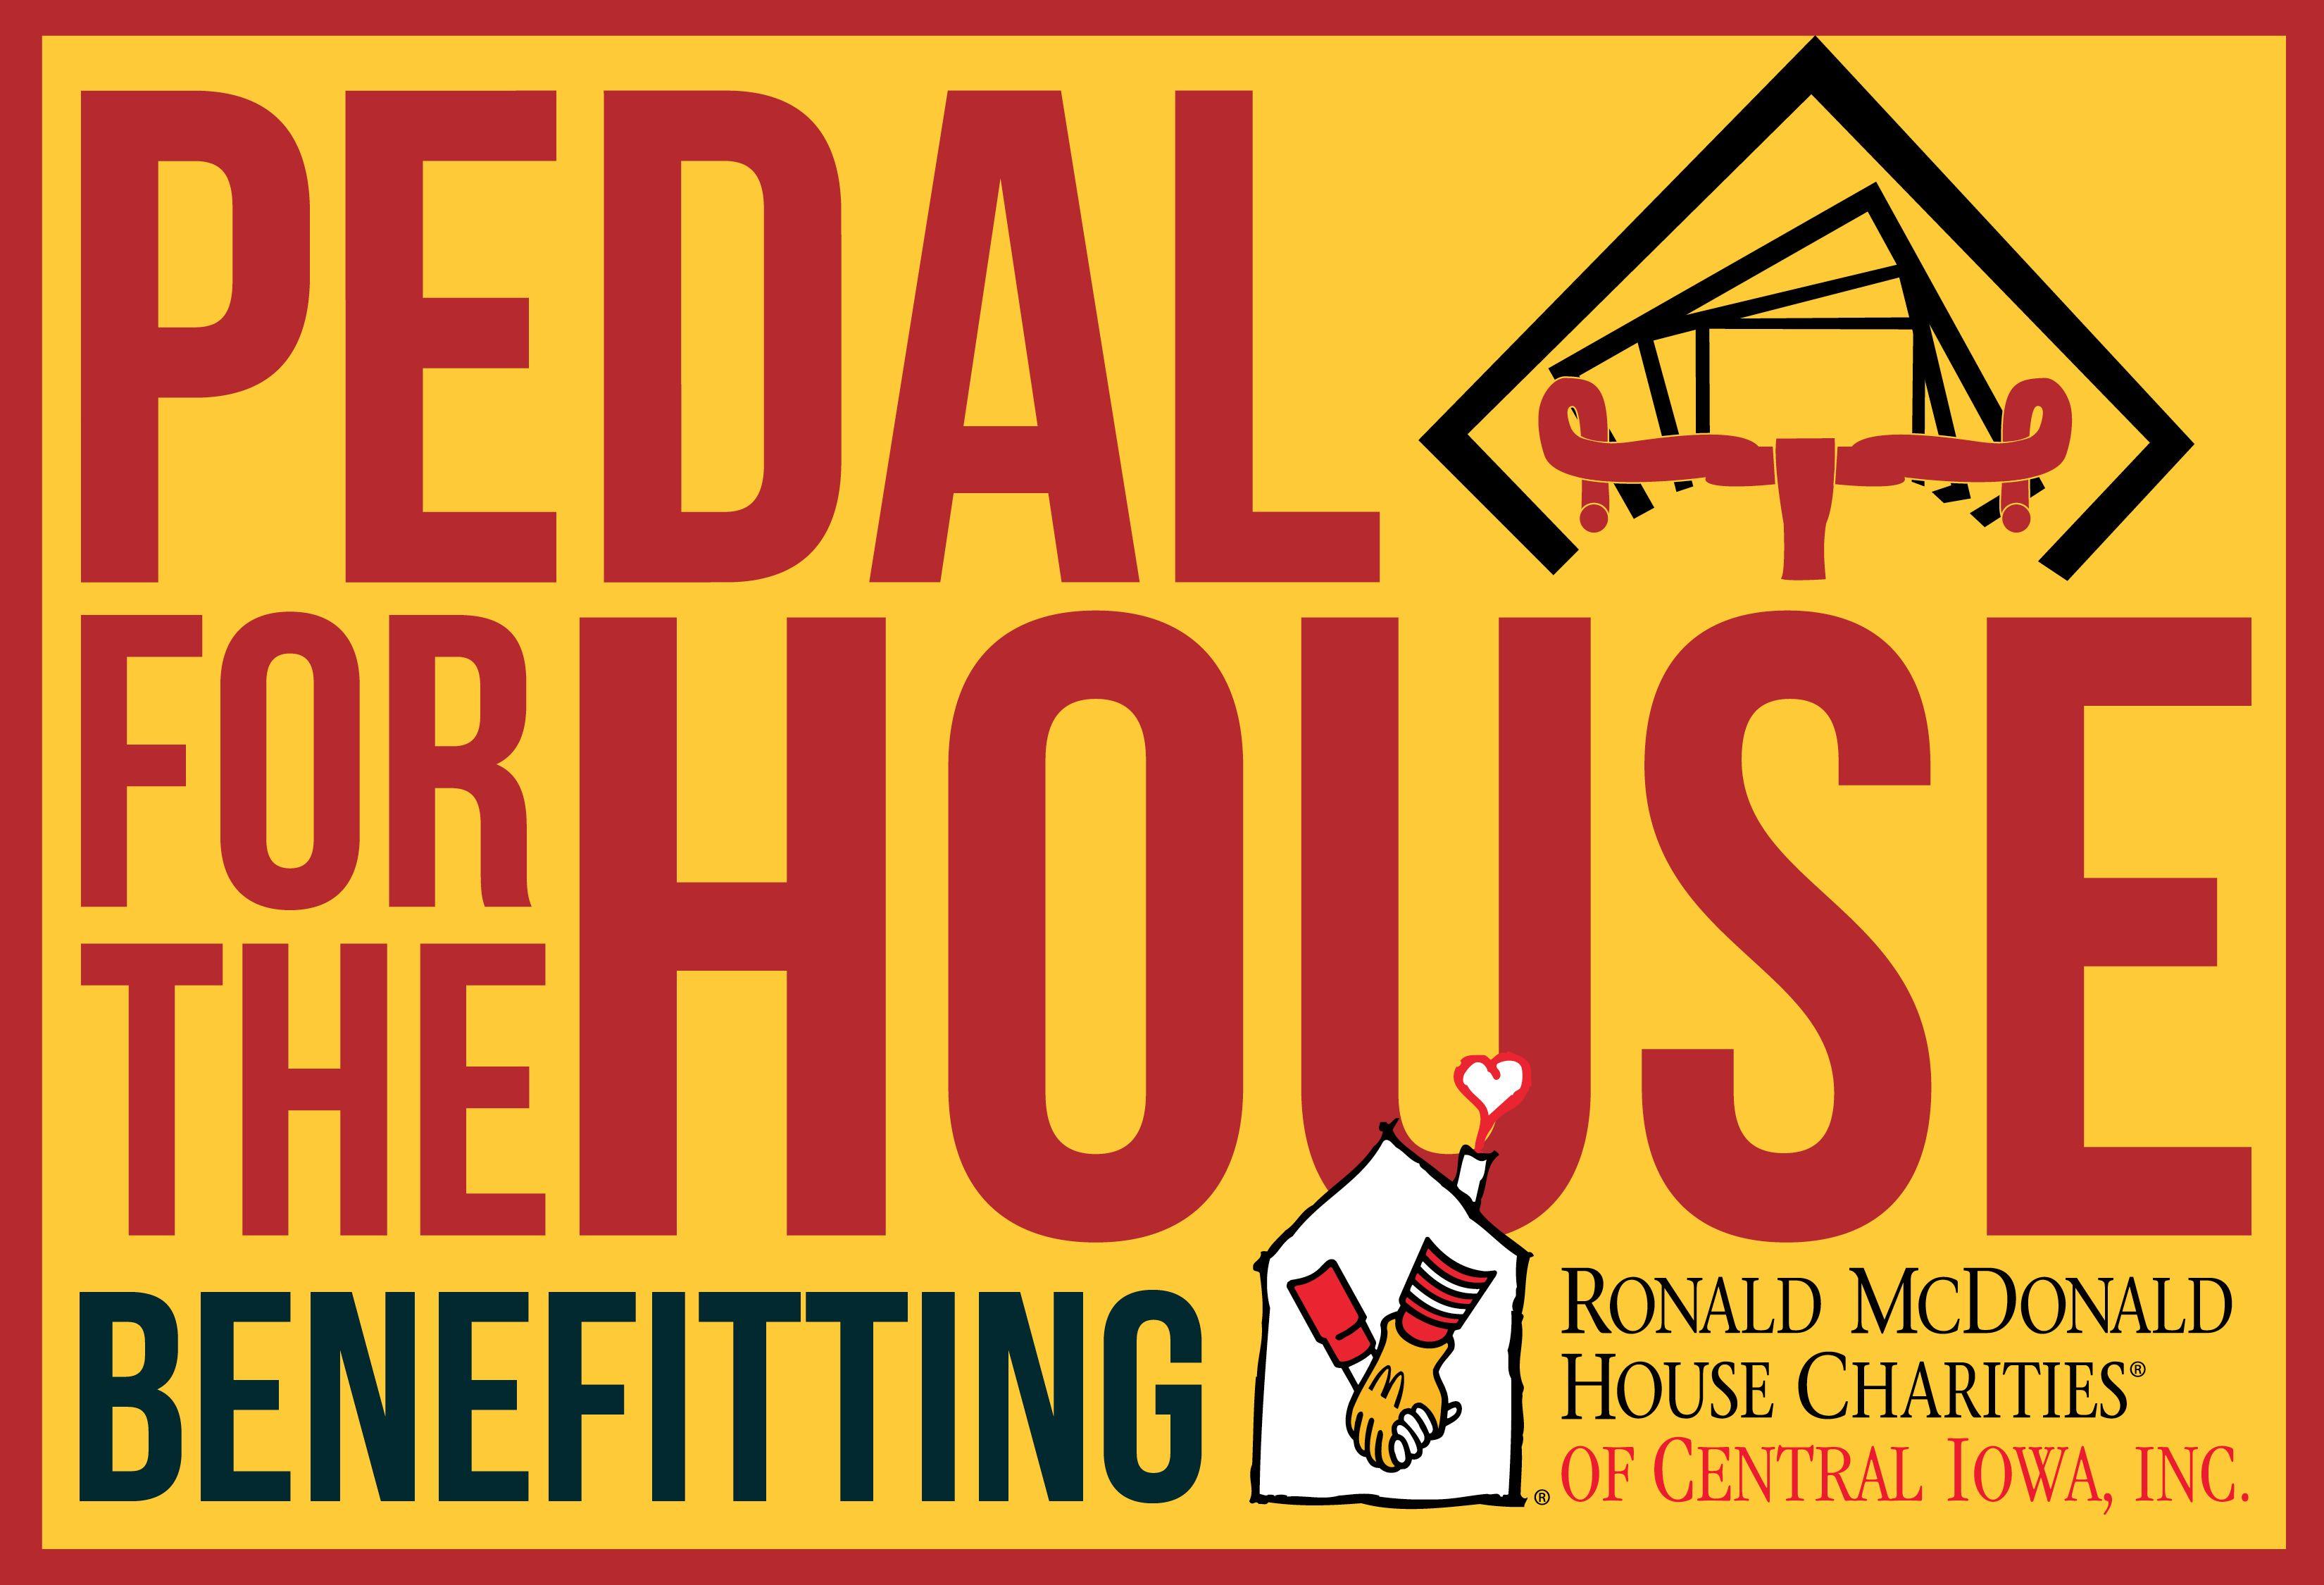 FirstGiving Logo - Pedal for the House First Giving Logo | RMH Des Moines